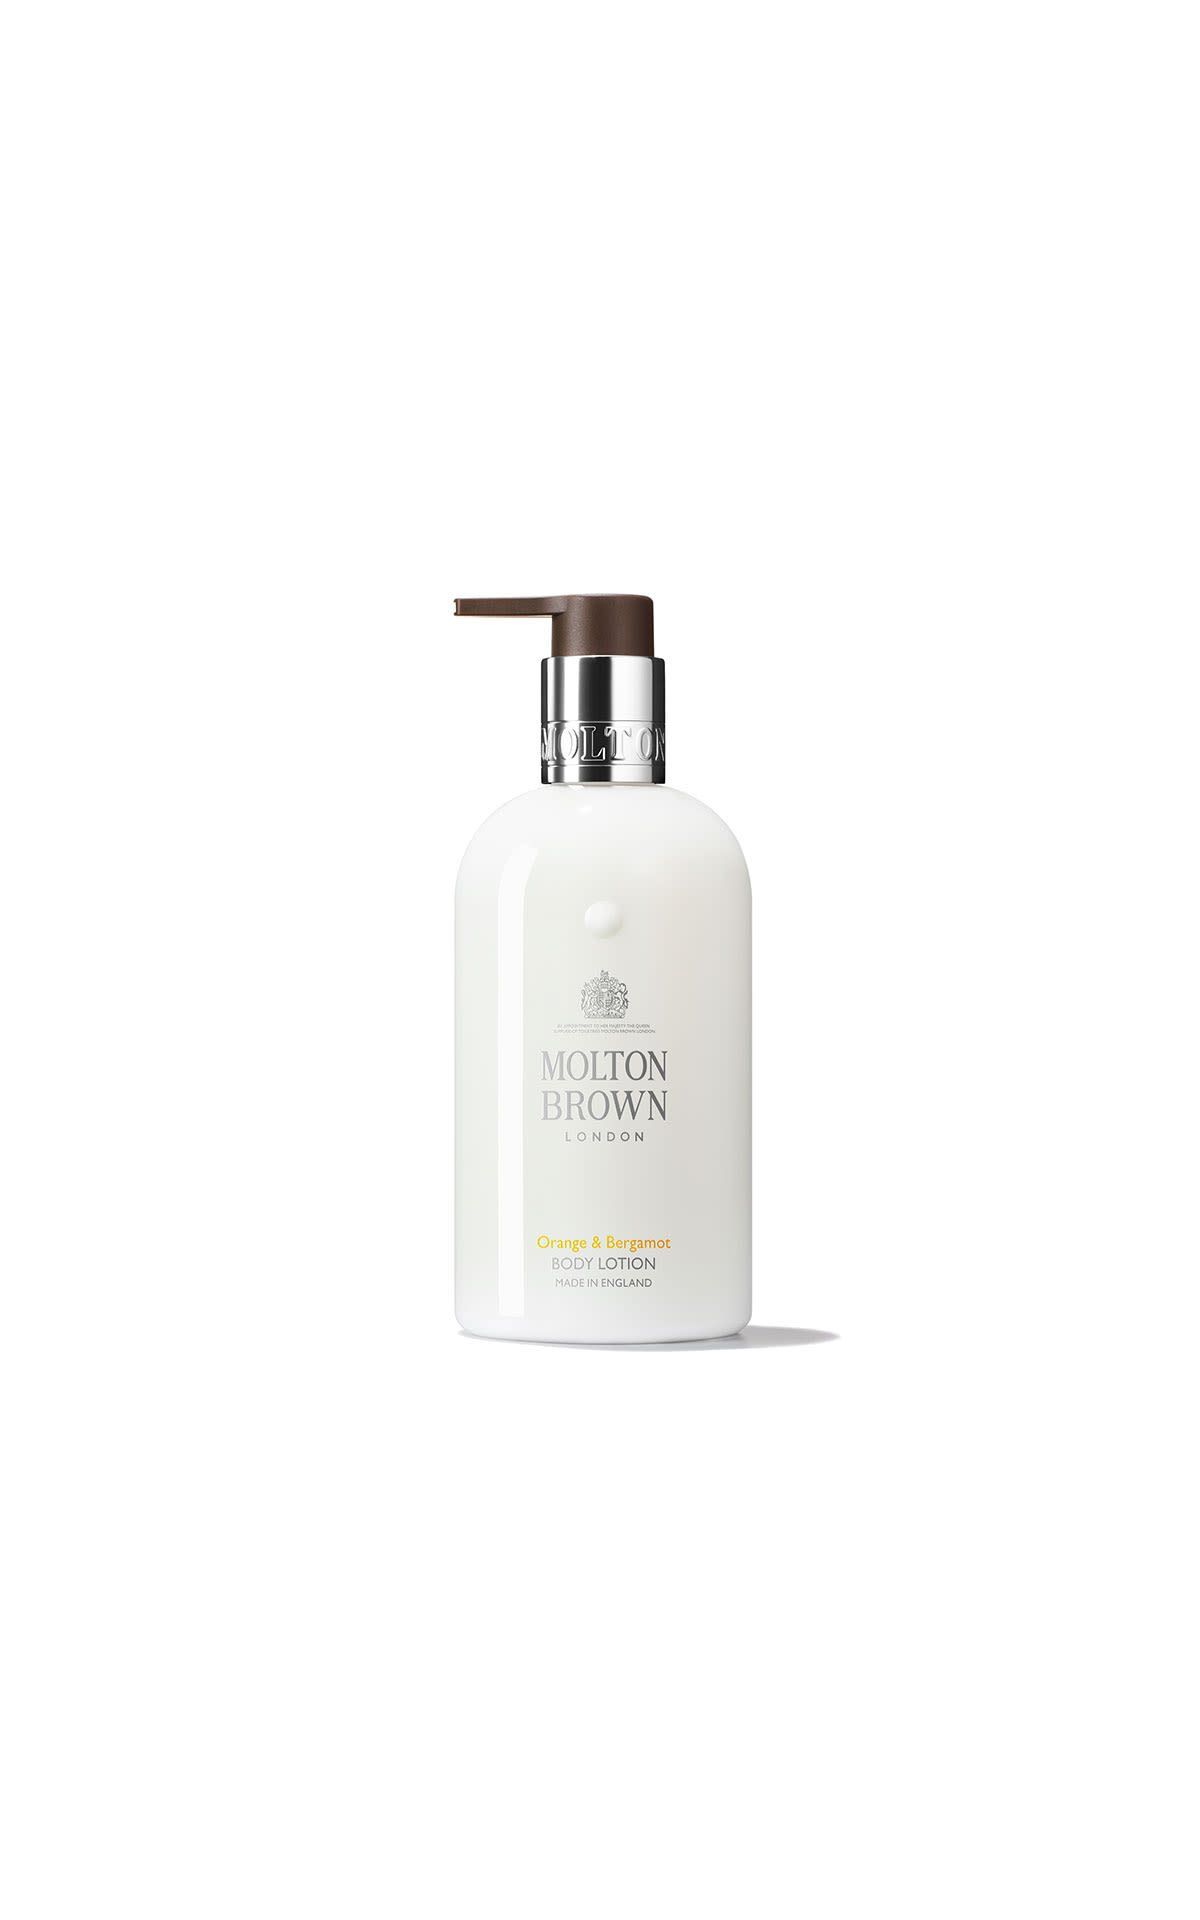 Molton Brown Orange and bergamot body lotion from Bicester Village